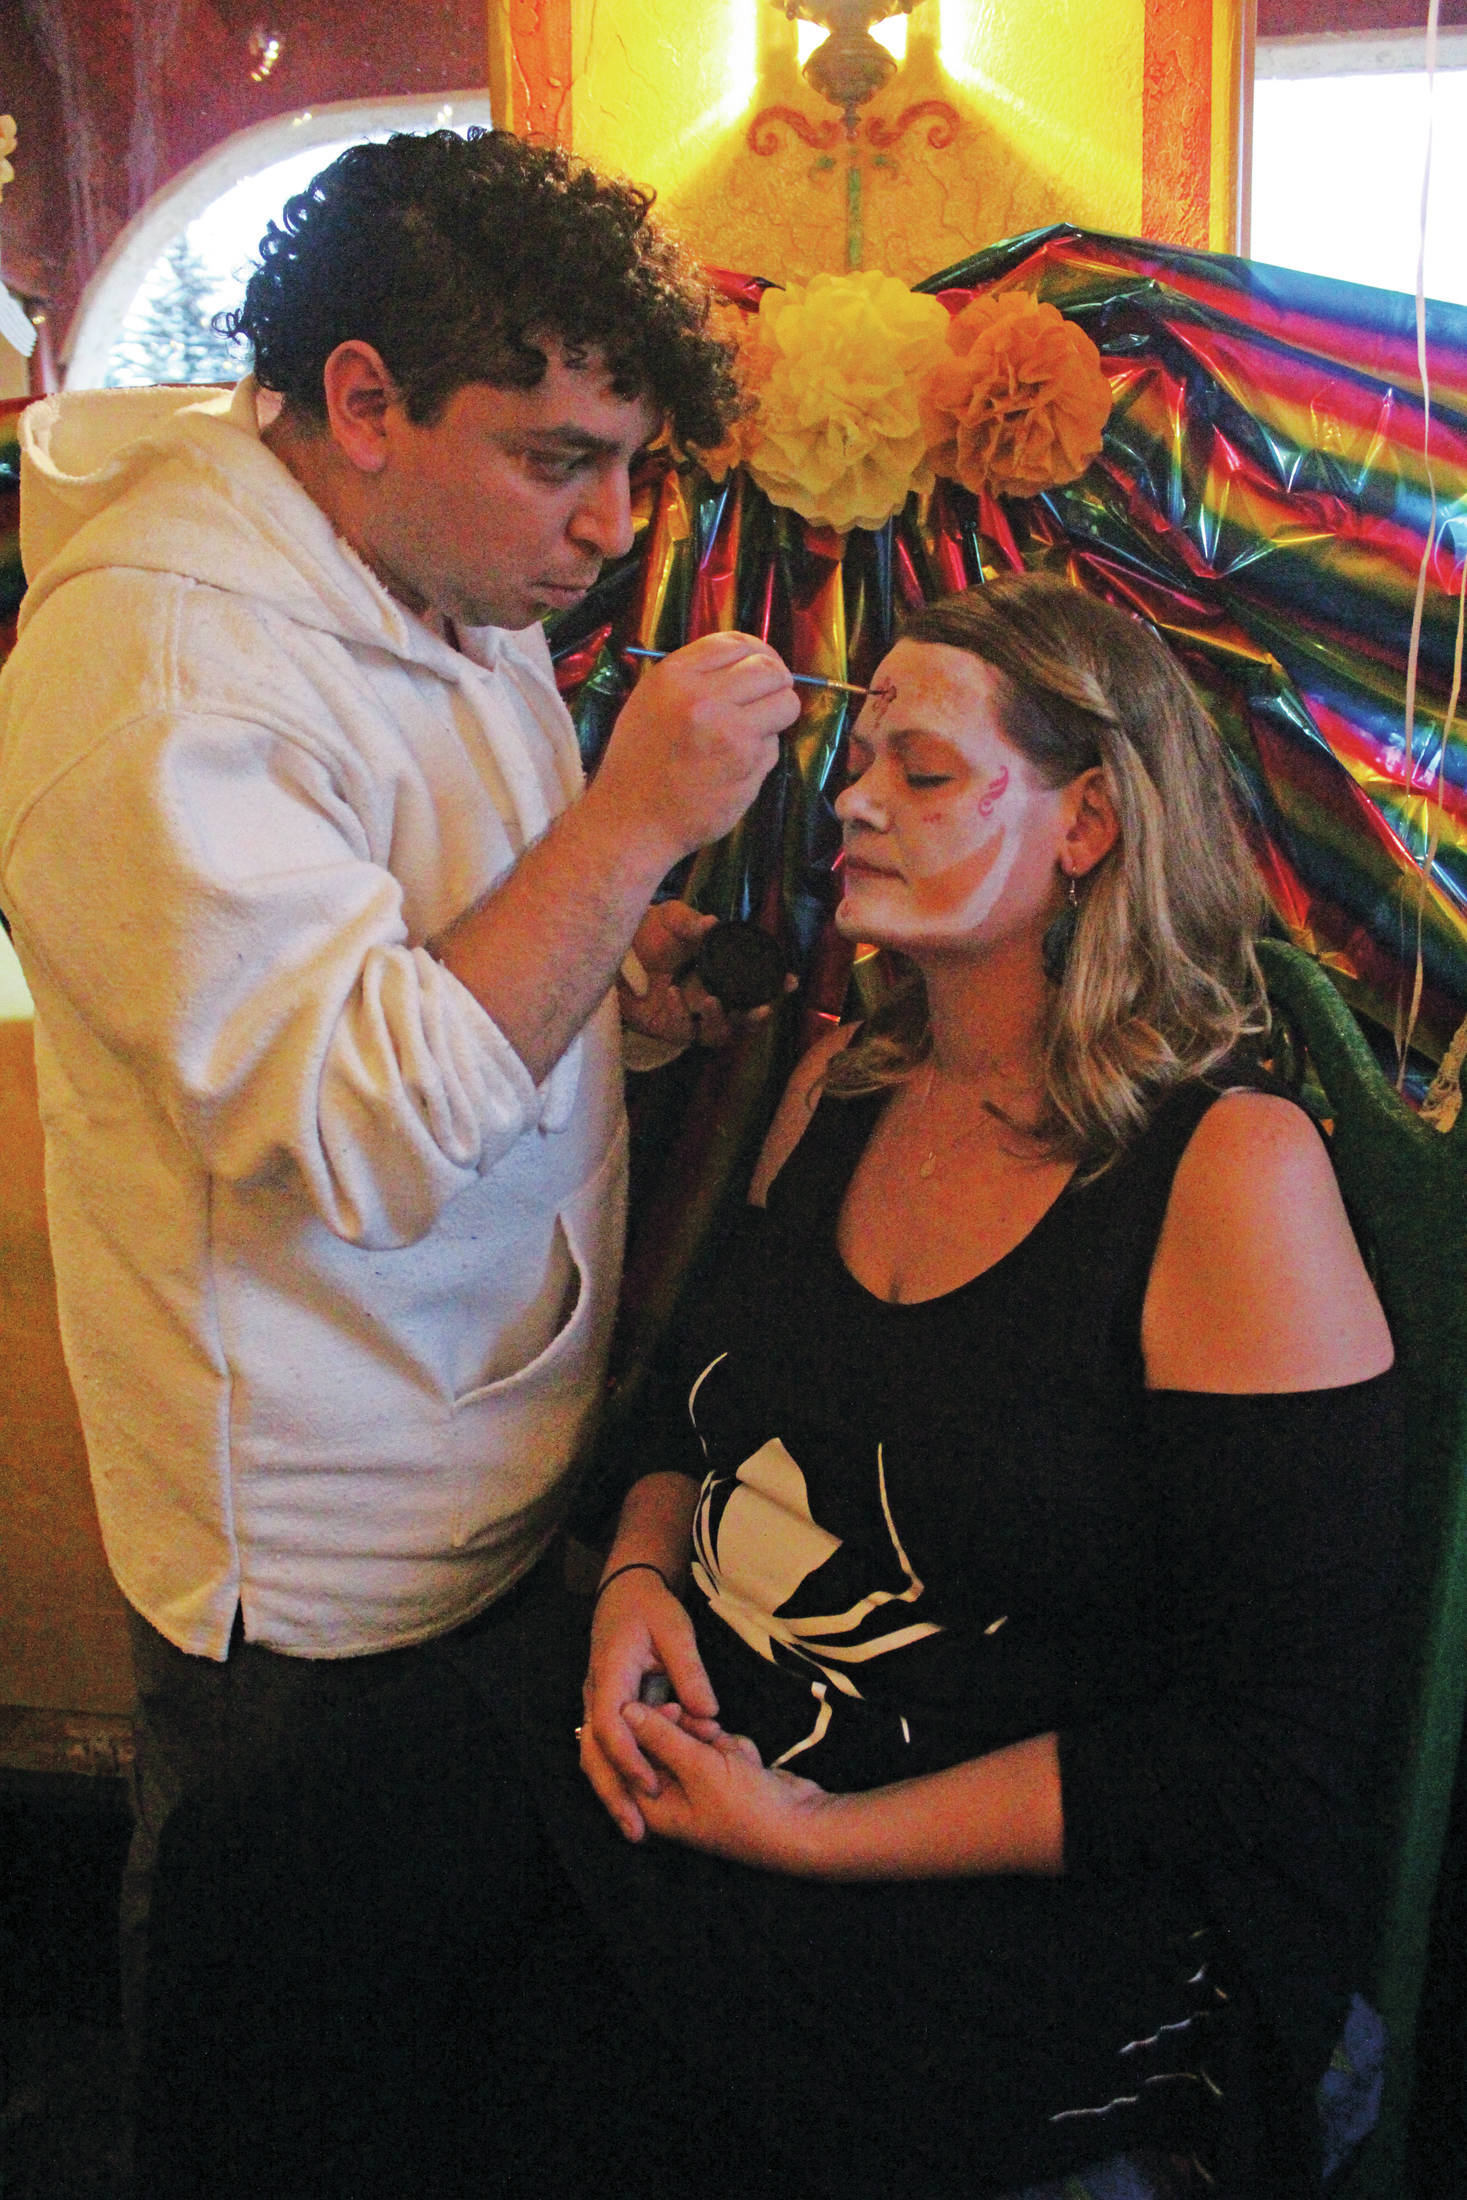 Katie Ochoa has her face painted by Isidro Sandoval during a Dia de los Muertos celebration Saturday, Nov. 2, 2019 at Don Jose’s Mexican Restaurant in Homer, Alaska. (Photo by Megan Pacer/Homer News)